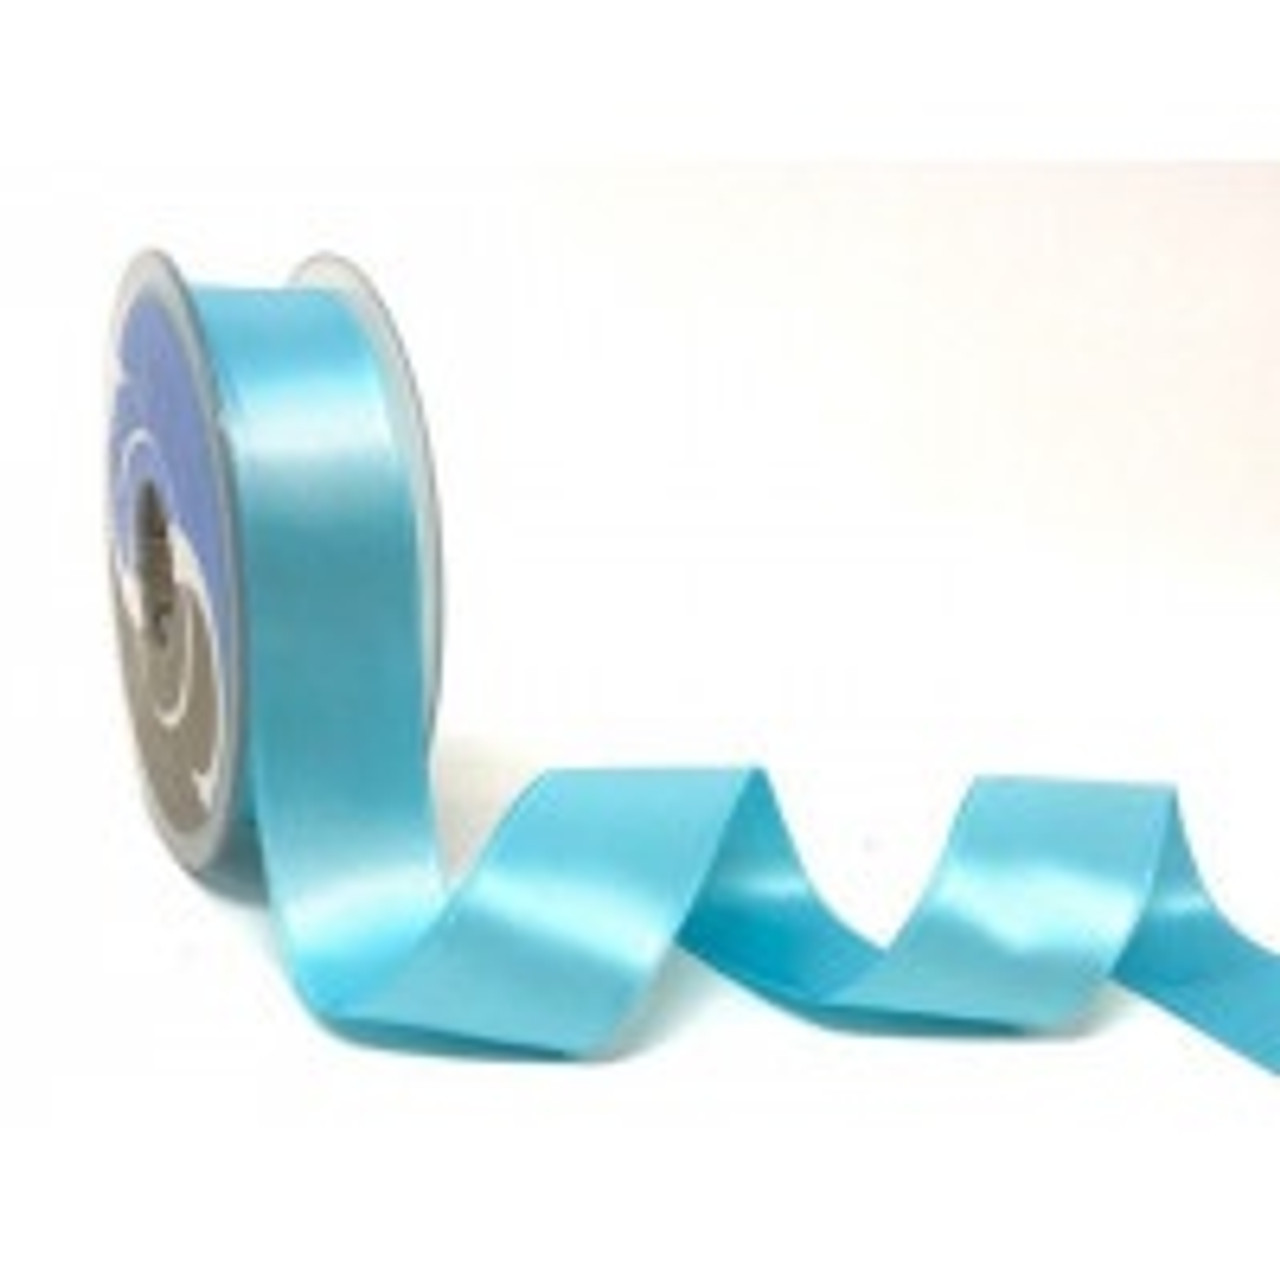 Pale Turquoise Satin Ribbon, 25mm wide, Sold Per Metre